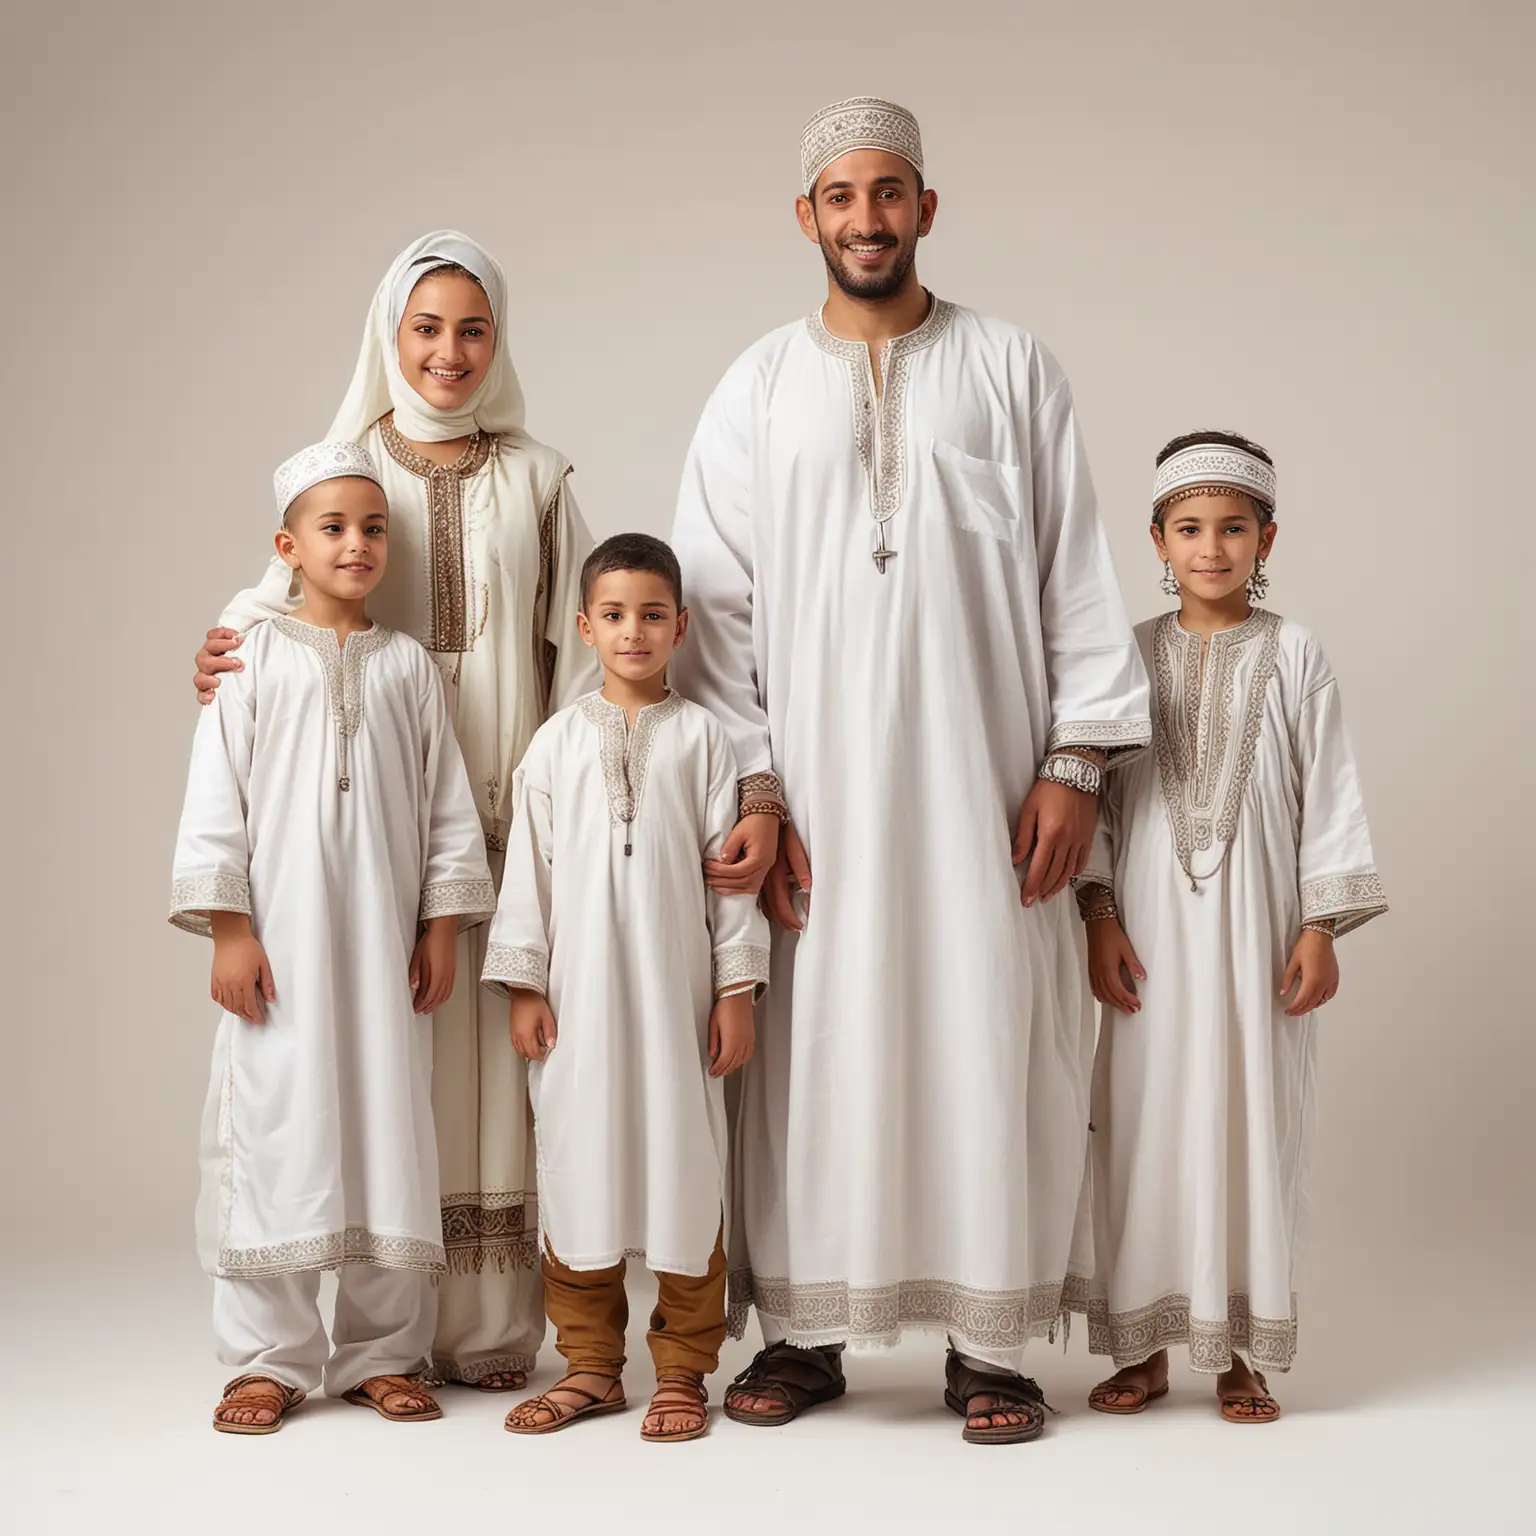 Moroccan family,man, woman, children wearing traditional clothes, full standing figures, white neutral background